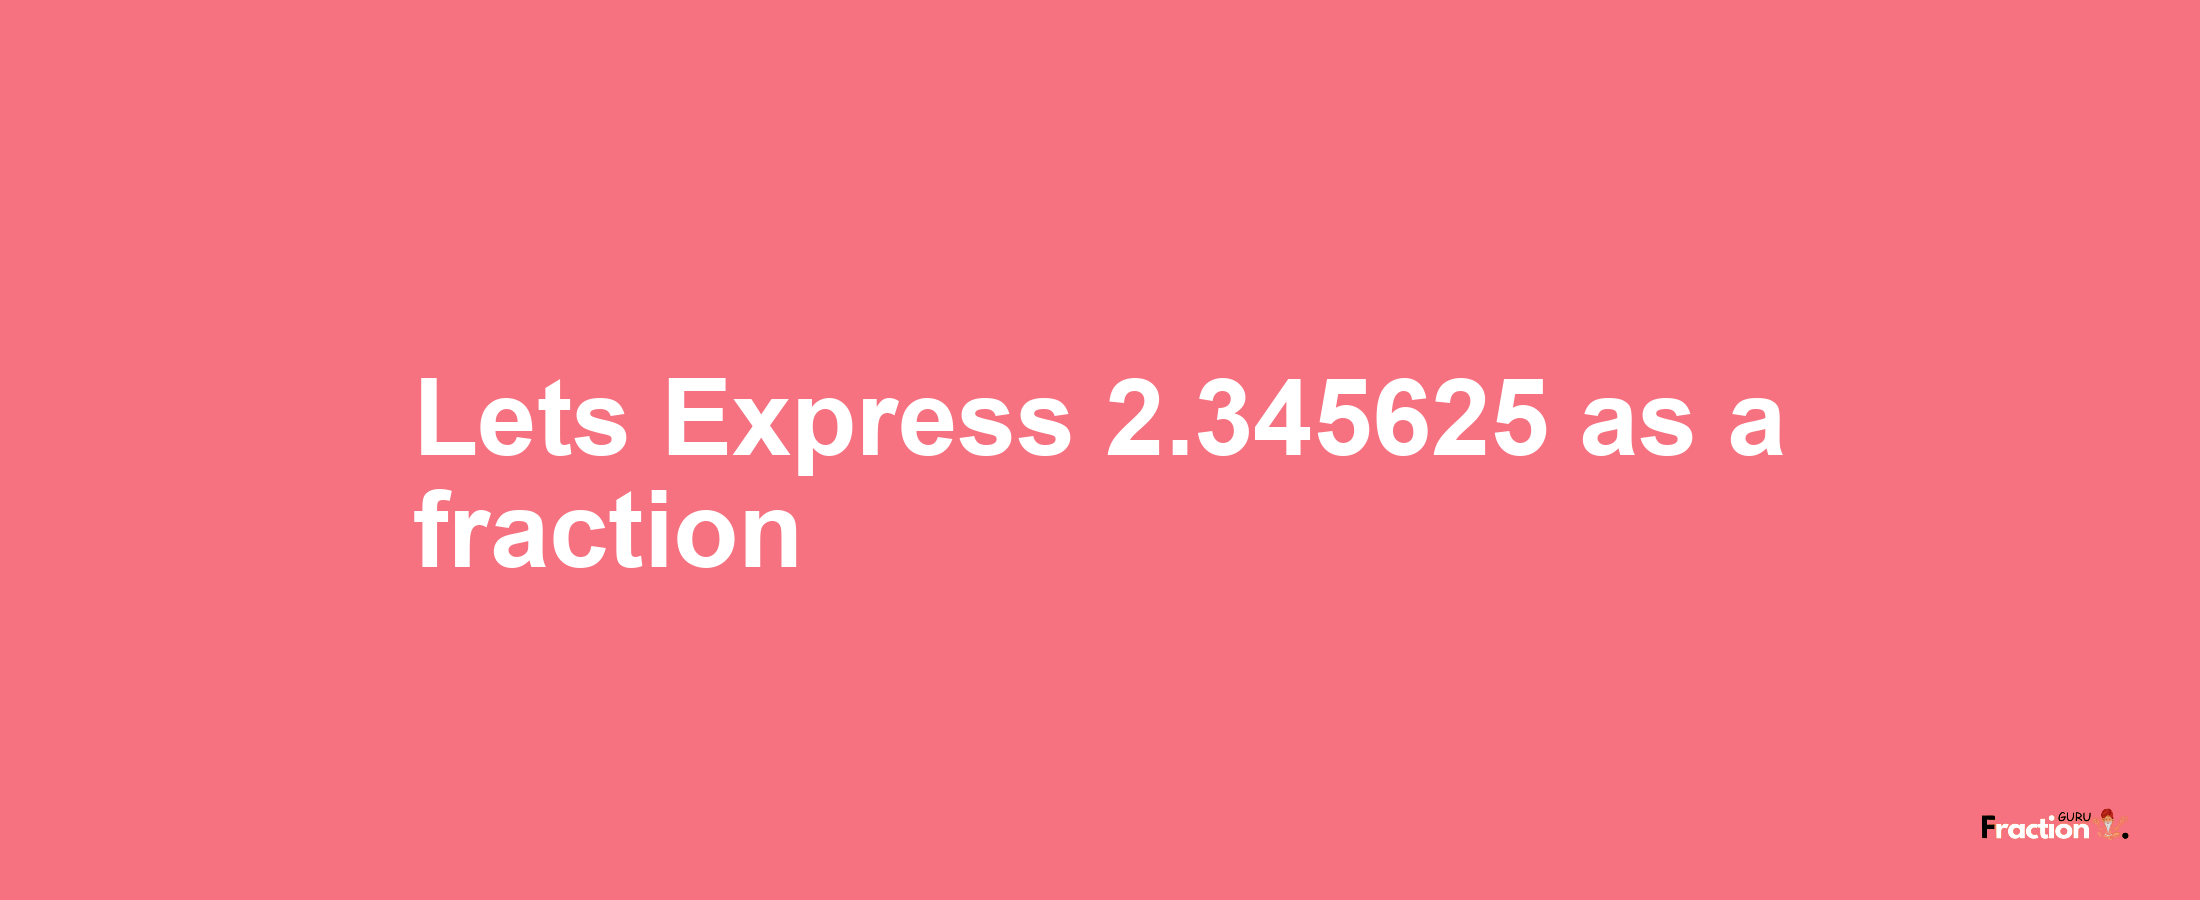 Lets Express 2.345625 as afraction